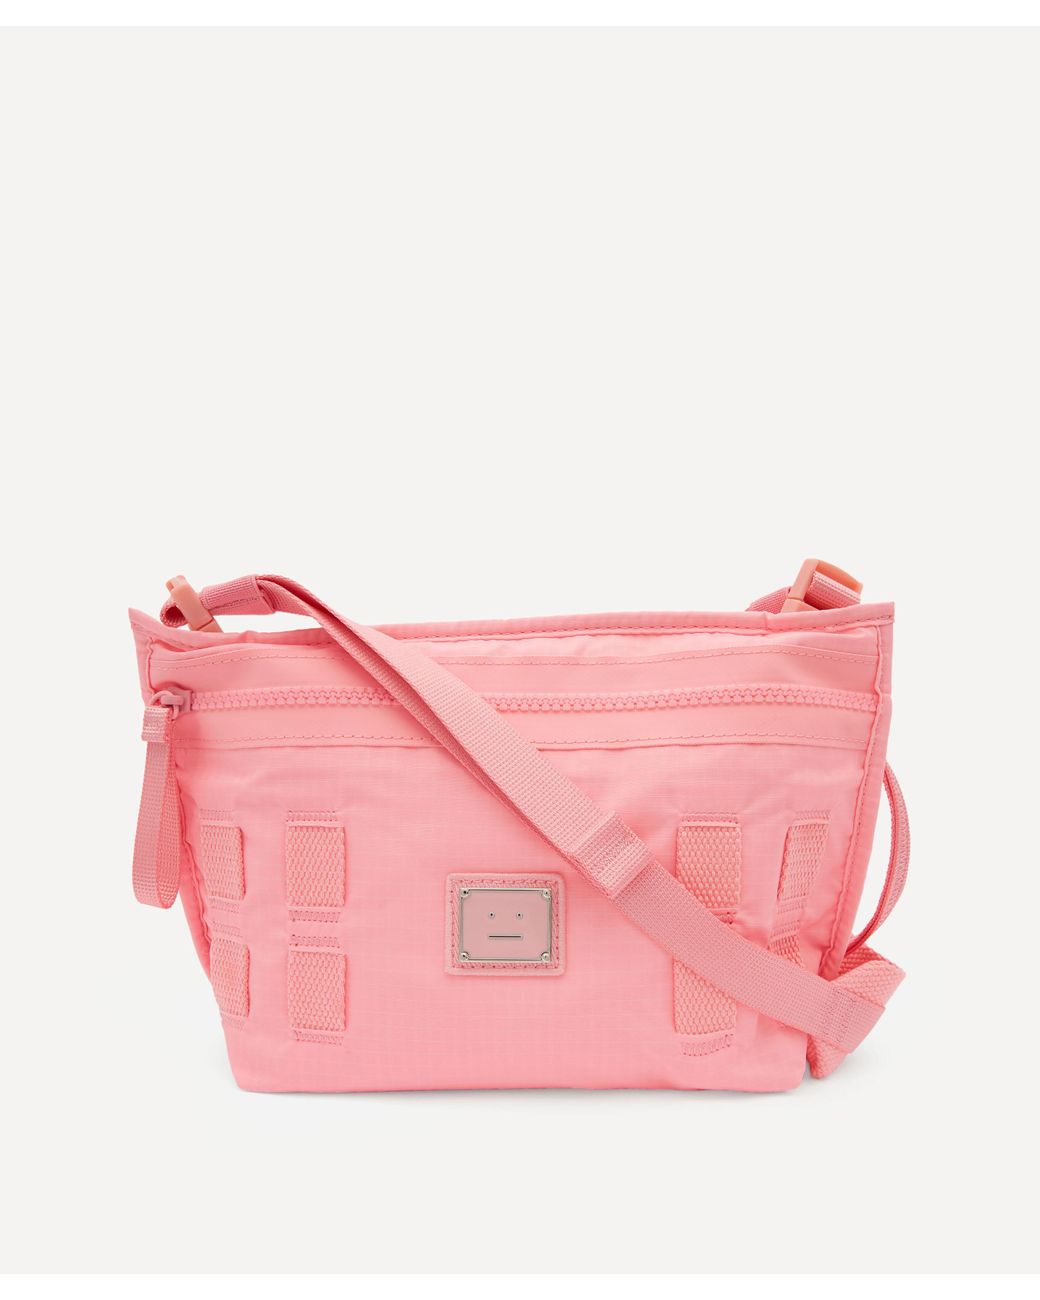 Acne Studios Logo Plaque Cross-body Bag in Bright Pink (Pink) | Lyst